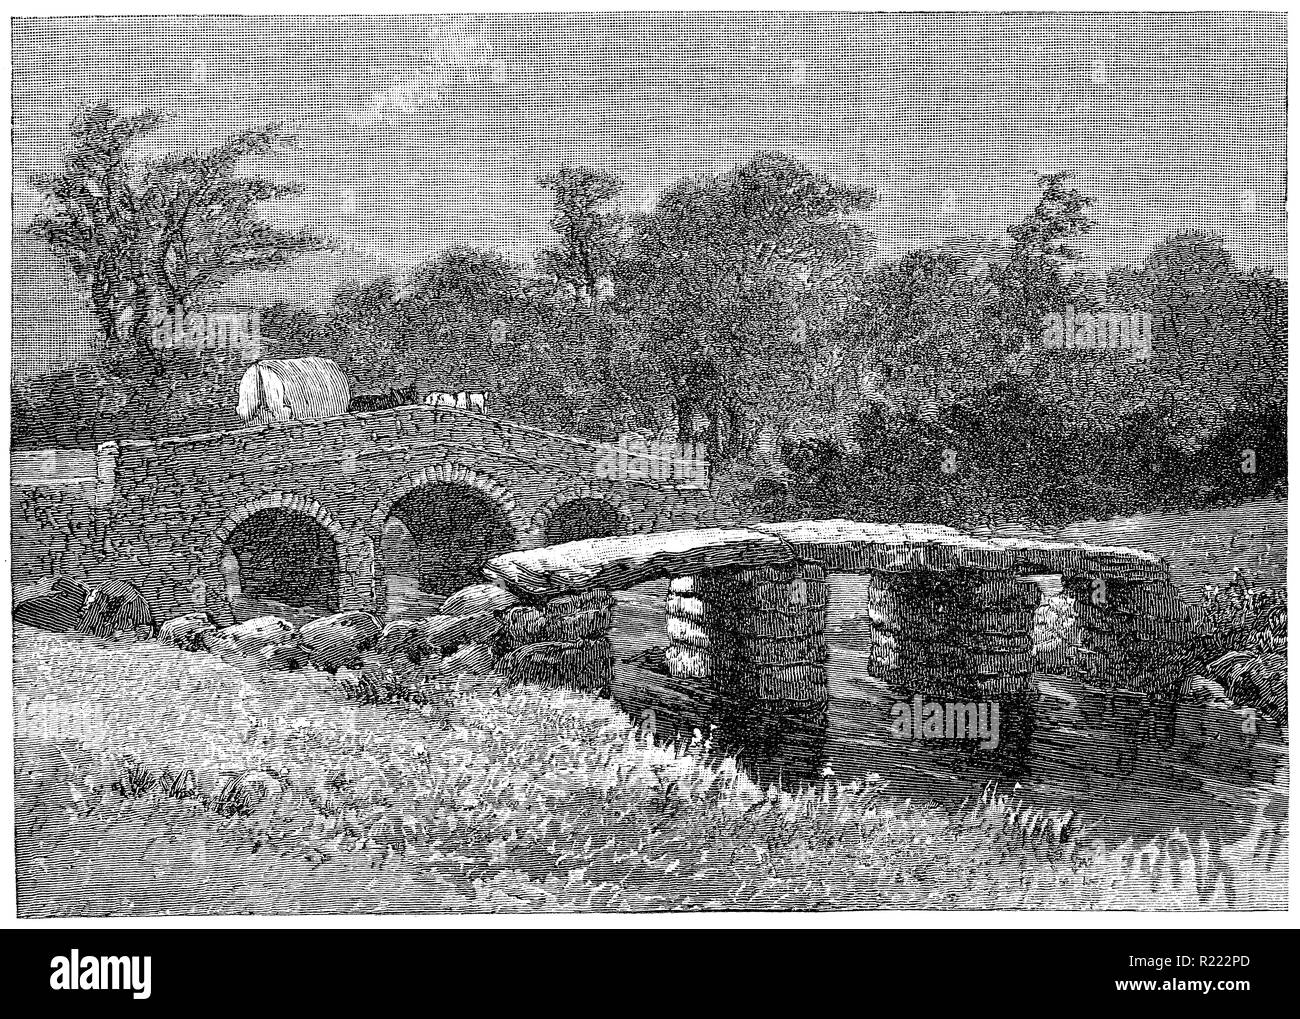 1884 vintage engraving of the medieval clapper bridge over the East Dart River at the village of Postbridge in Dartmoor, Devon, England. From a drawing by L.R. O'Brien. Stock Photo